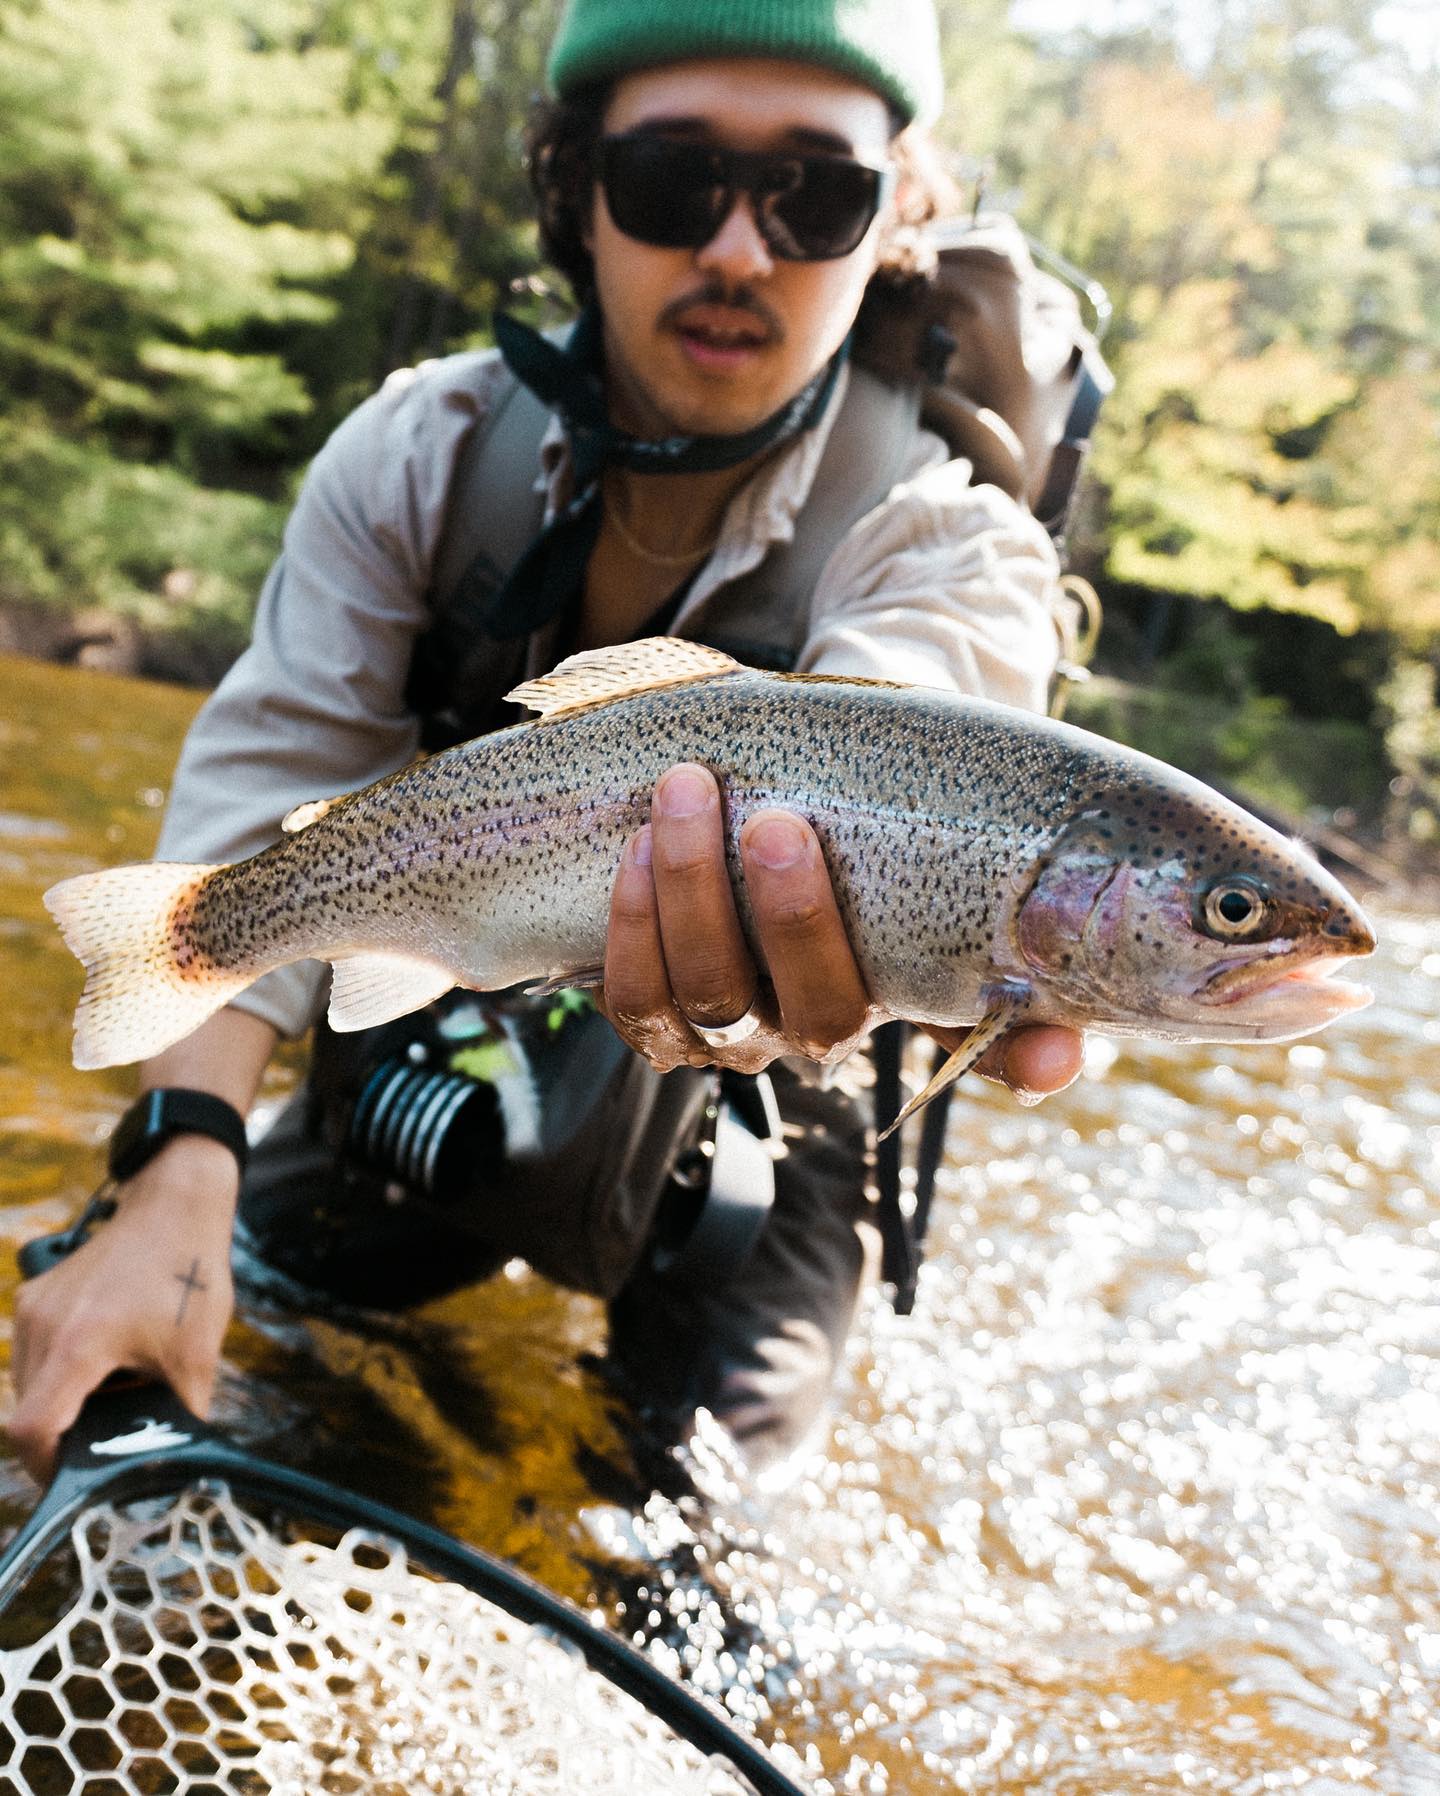 588  A Guide to Adirondacks Fly Fishing with David Brotzman: Ausable  River, TroutRoutes, Van Life - Wet Fly Swing